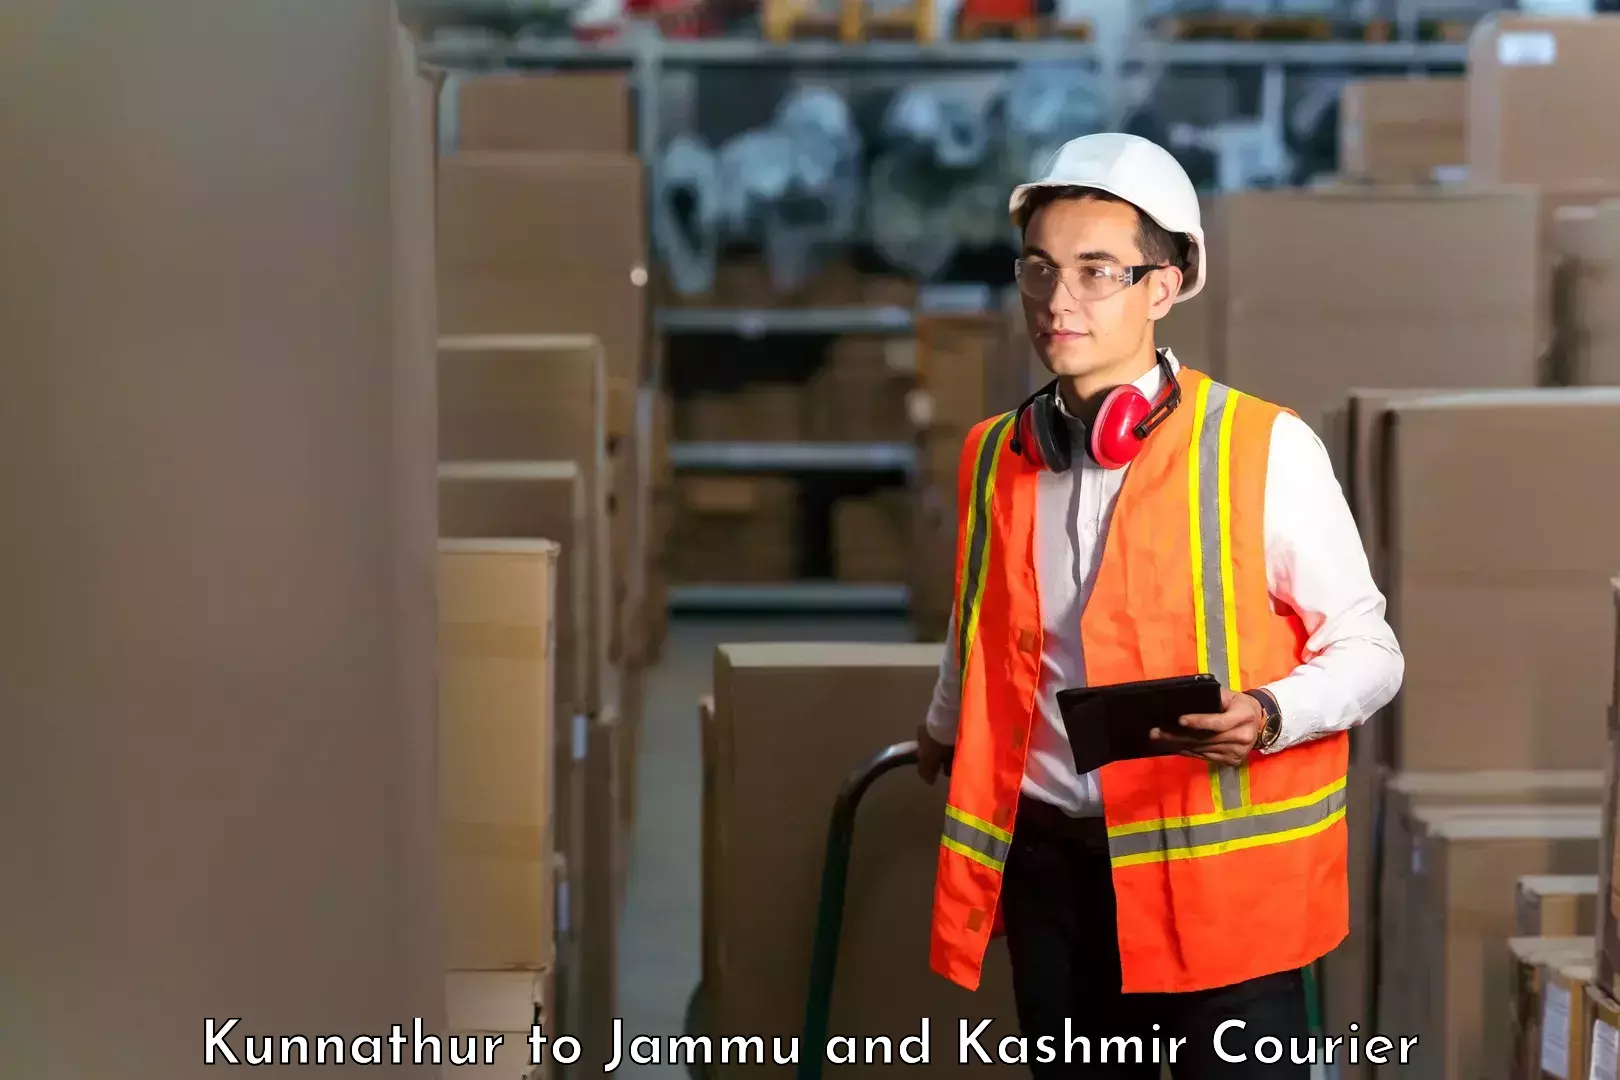 On-call courier service Kunnathur to Pulwama